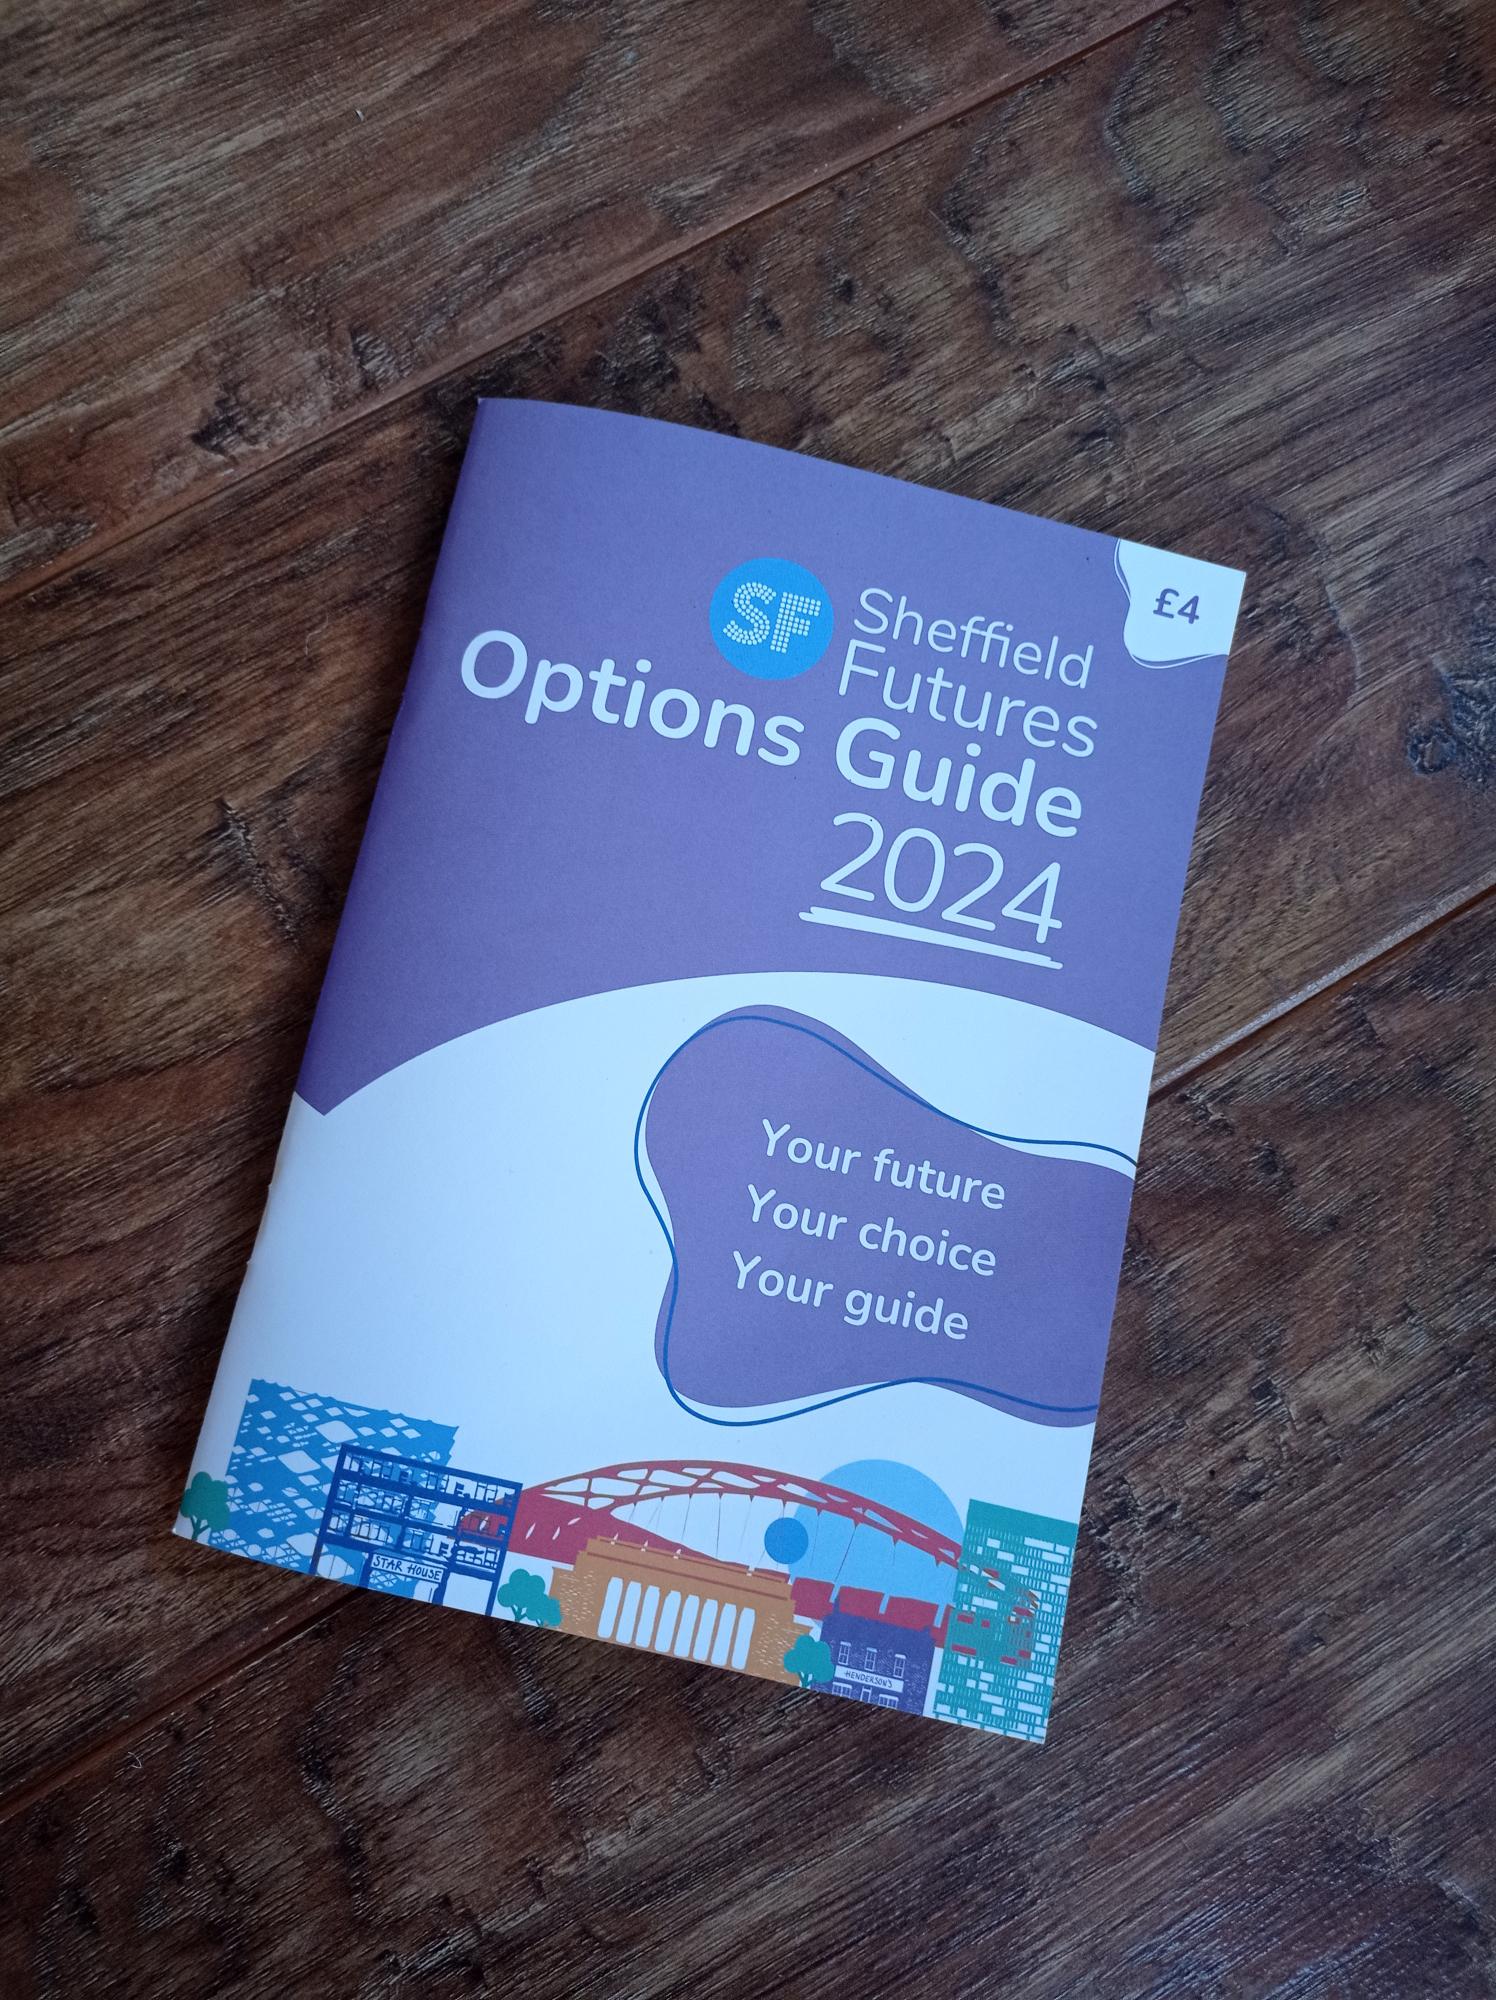 photo of a physical copy of the Options Guide 2024